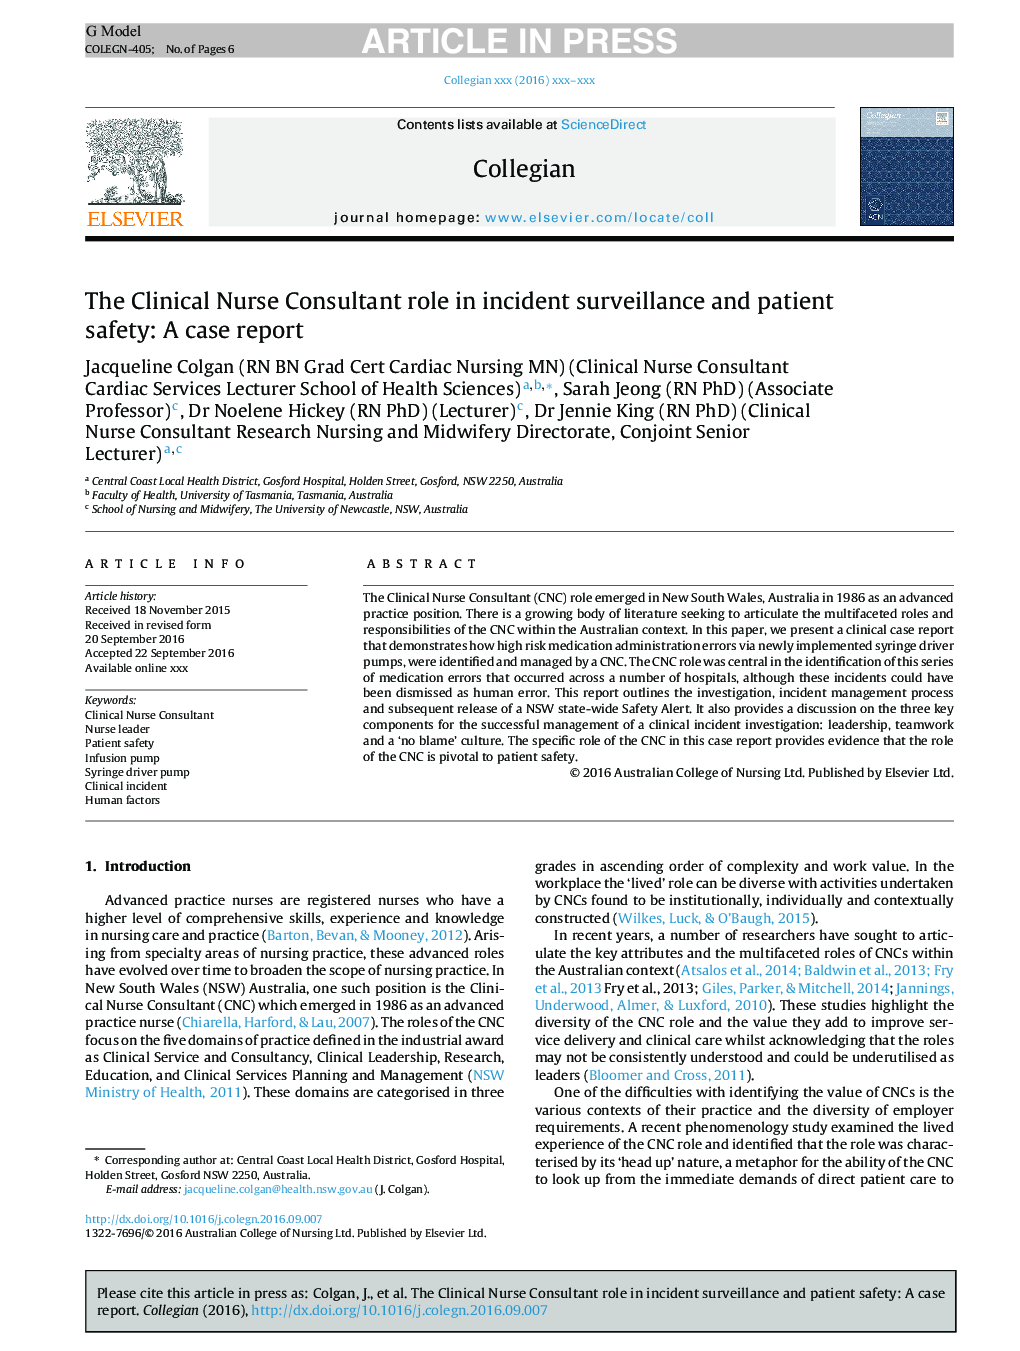 The Clinical Nurse Consultant role in incident surveillance and patient safety: A case report